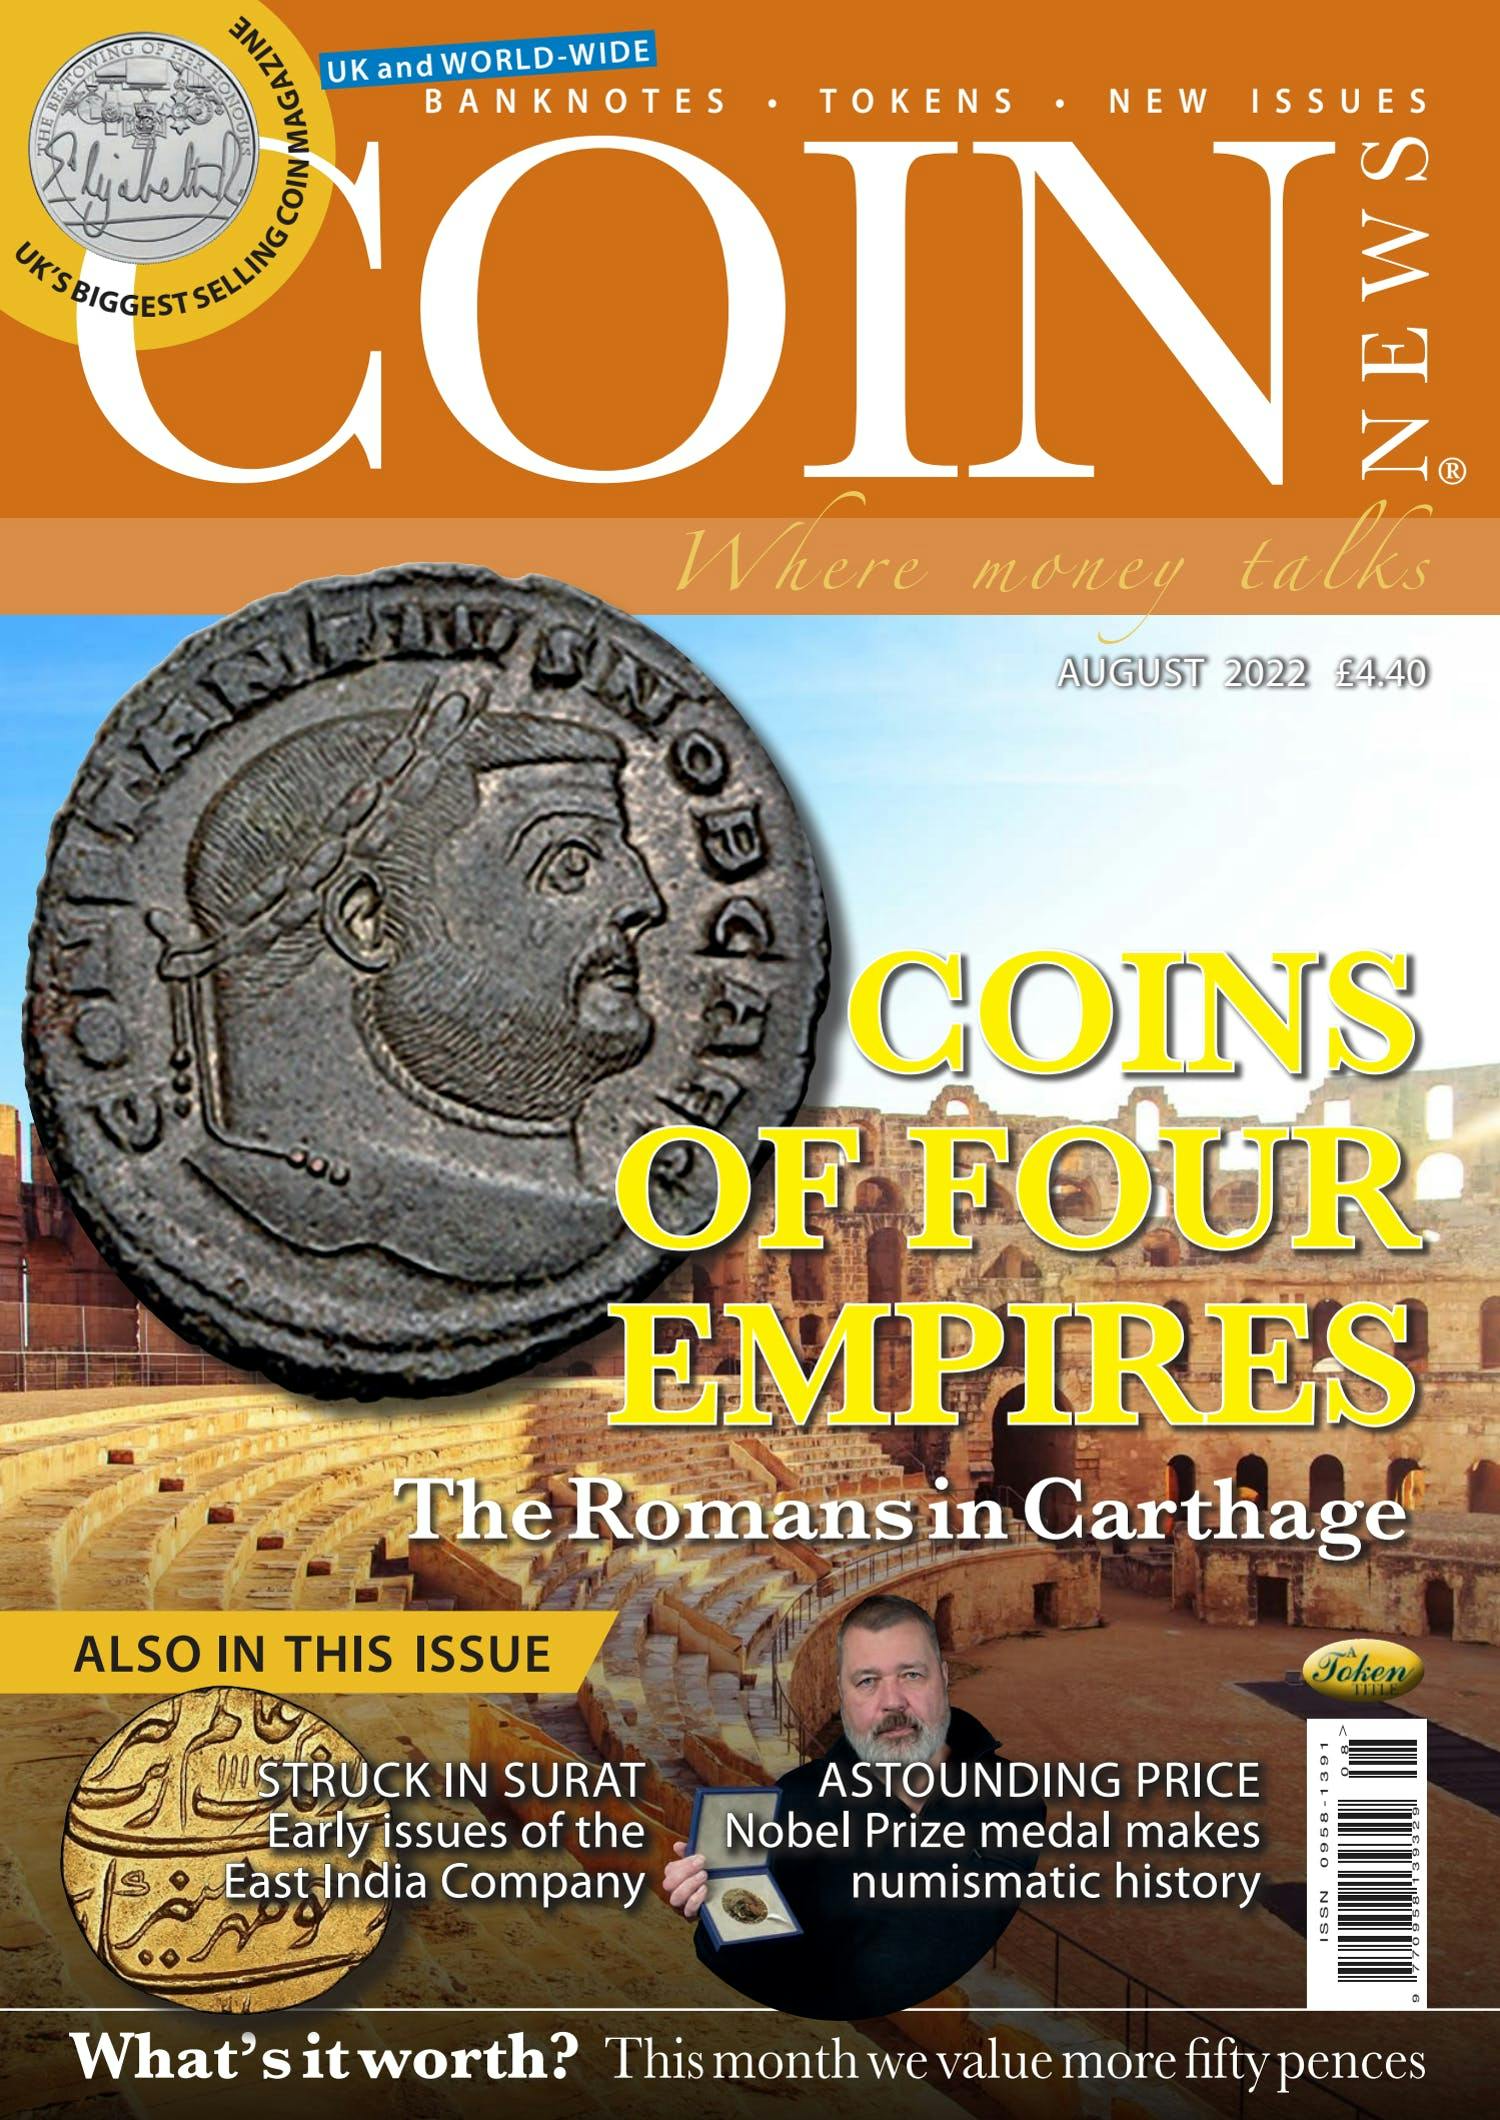 The front cover of Coin News, August 2022 - Volume 59, Number 8